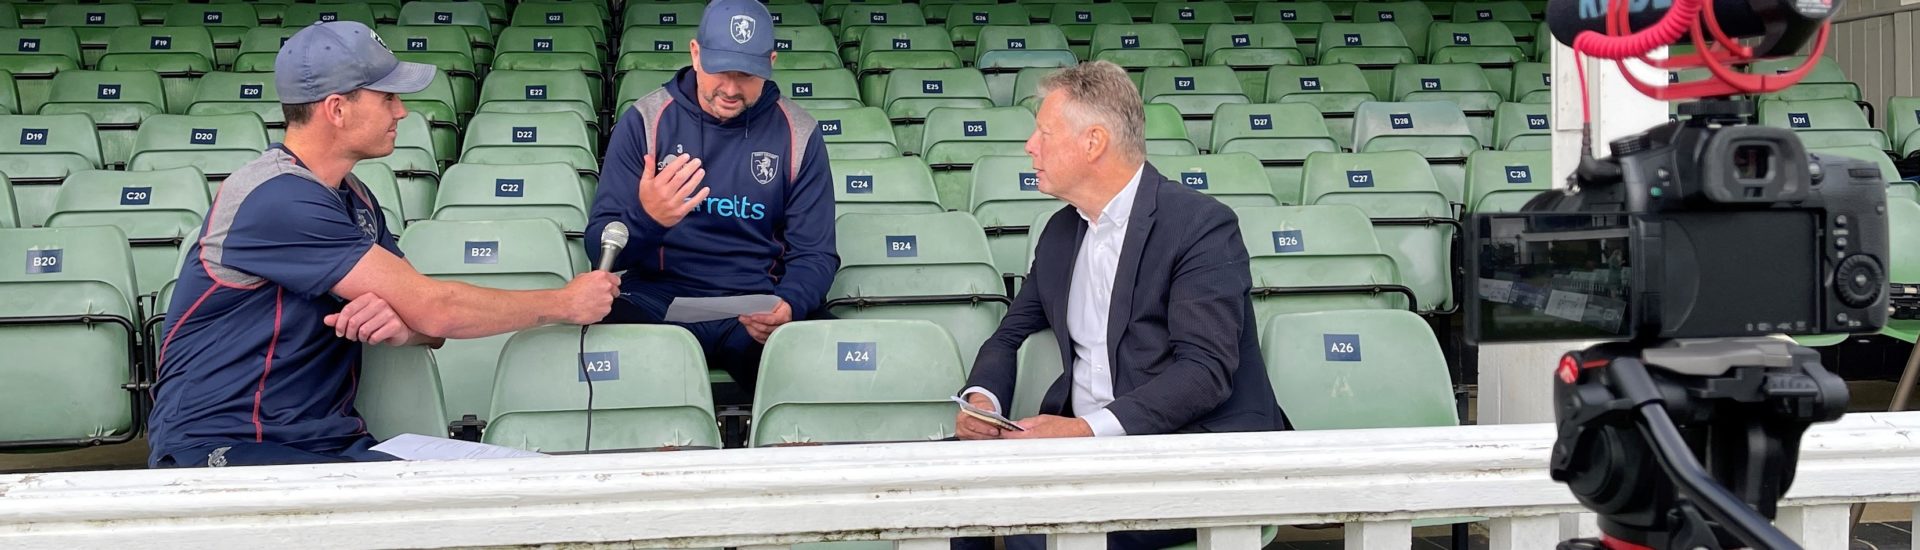 KIMS Hospital chats with Kent Cricket team member about men's health